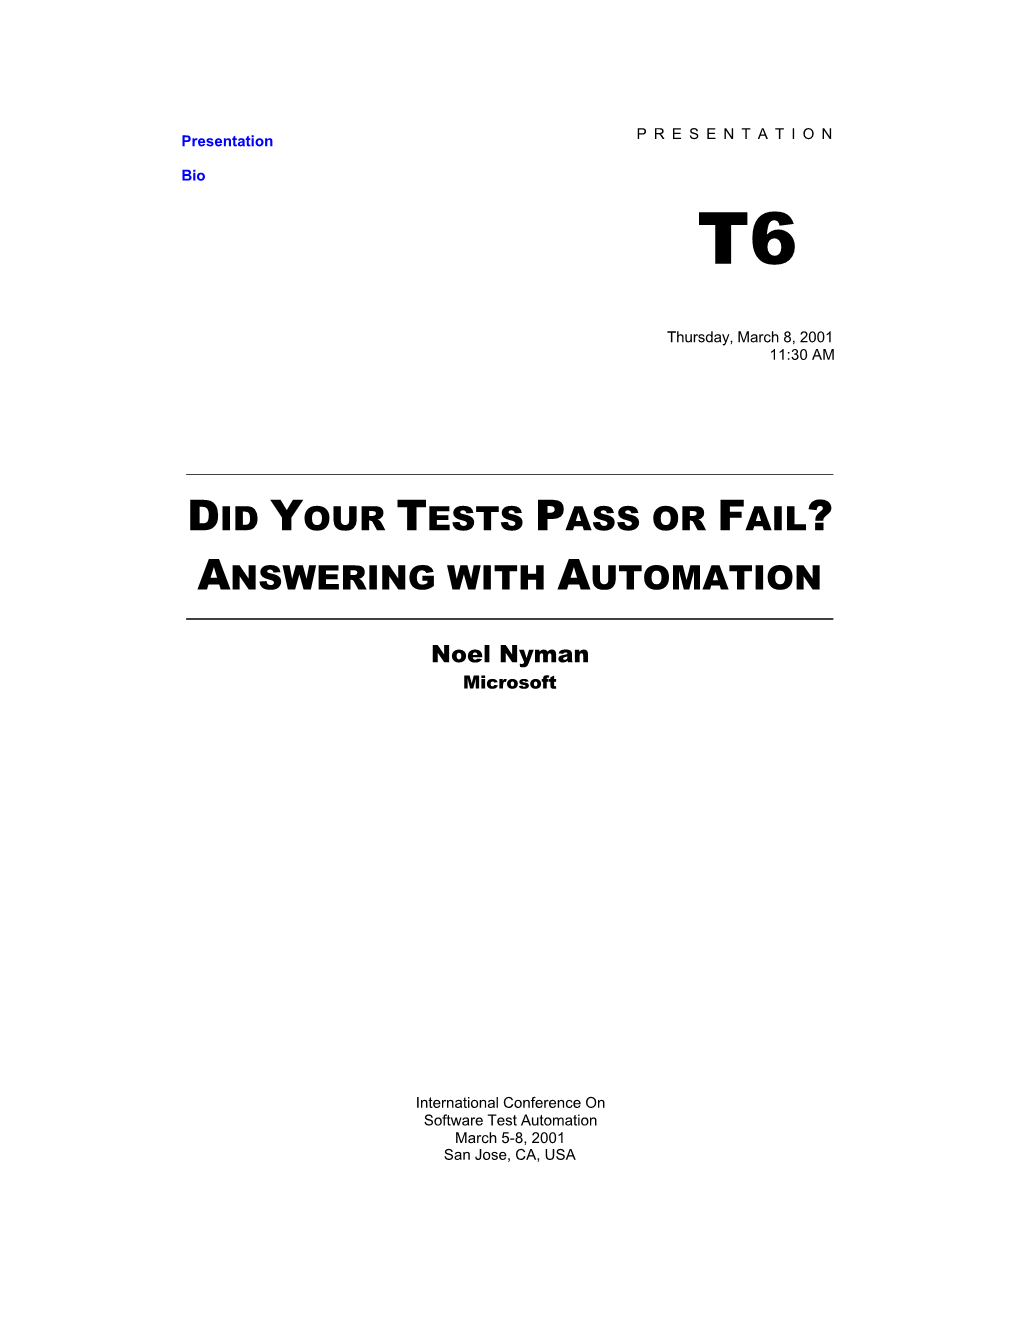 Did Your Tests Pass Or Fail? Answering with Automation